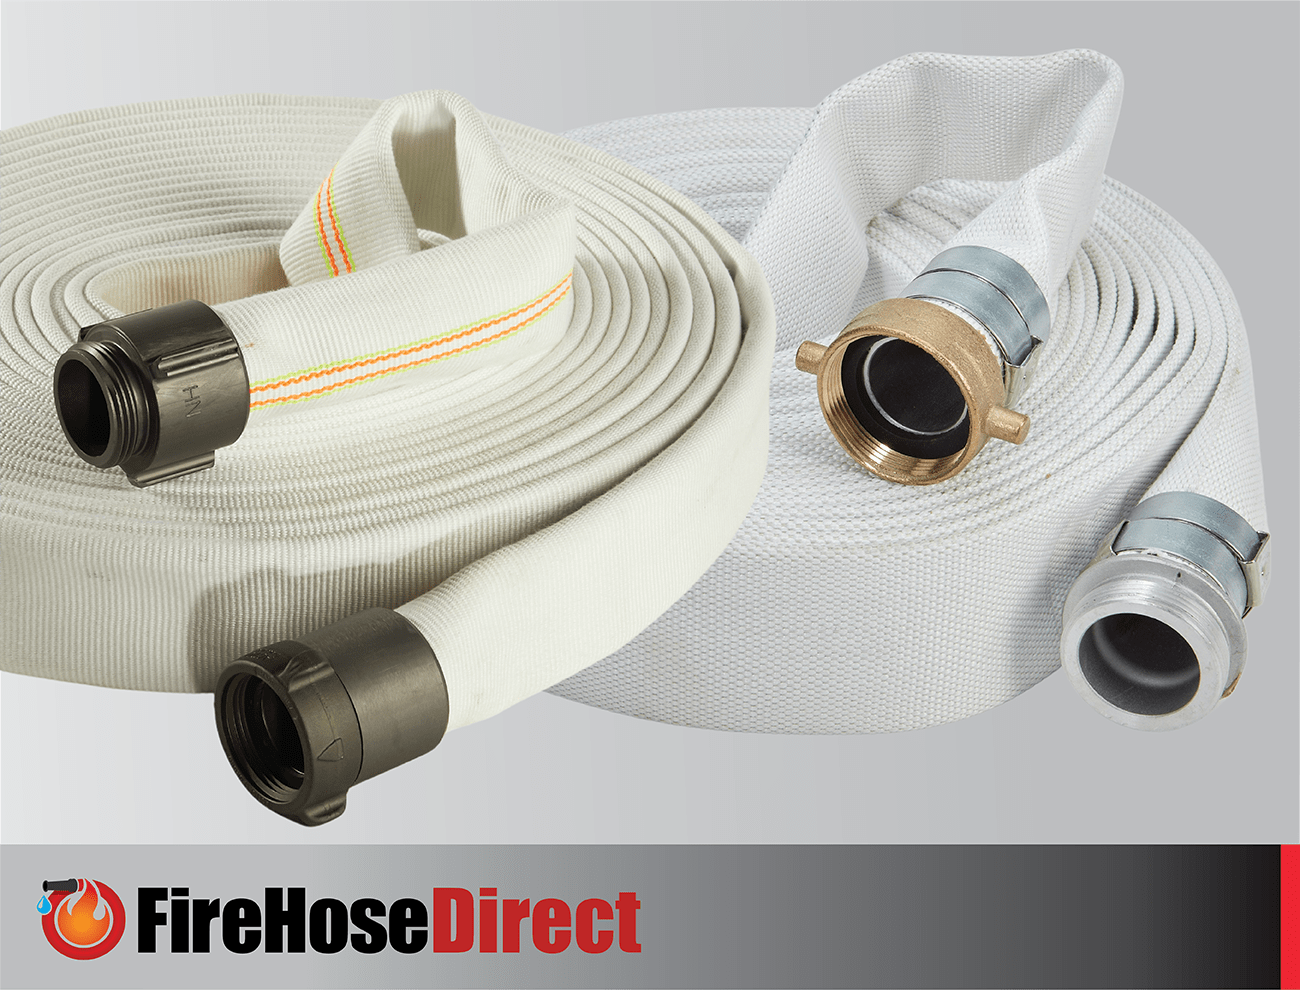 Fire Hoses and Accessories, Fire Hose Accessories